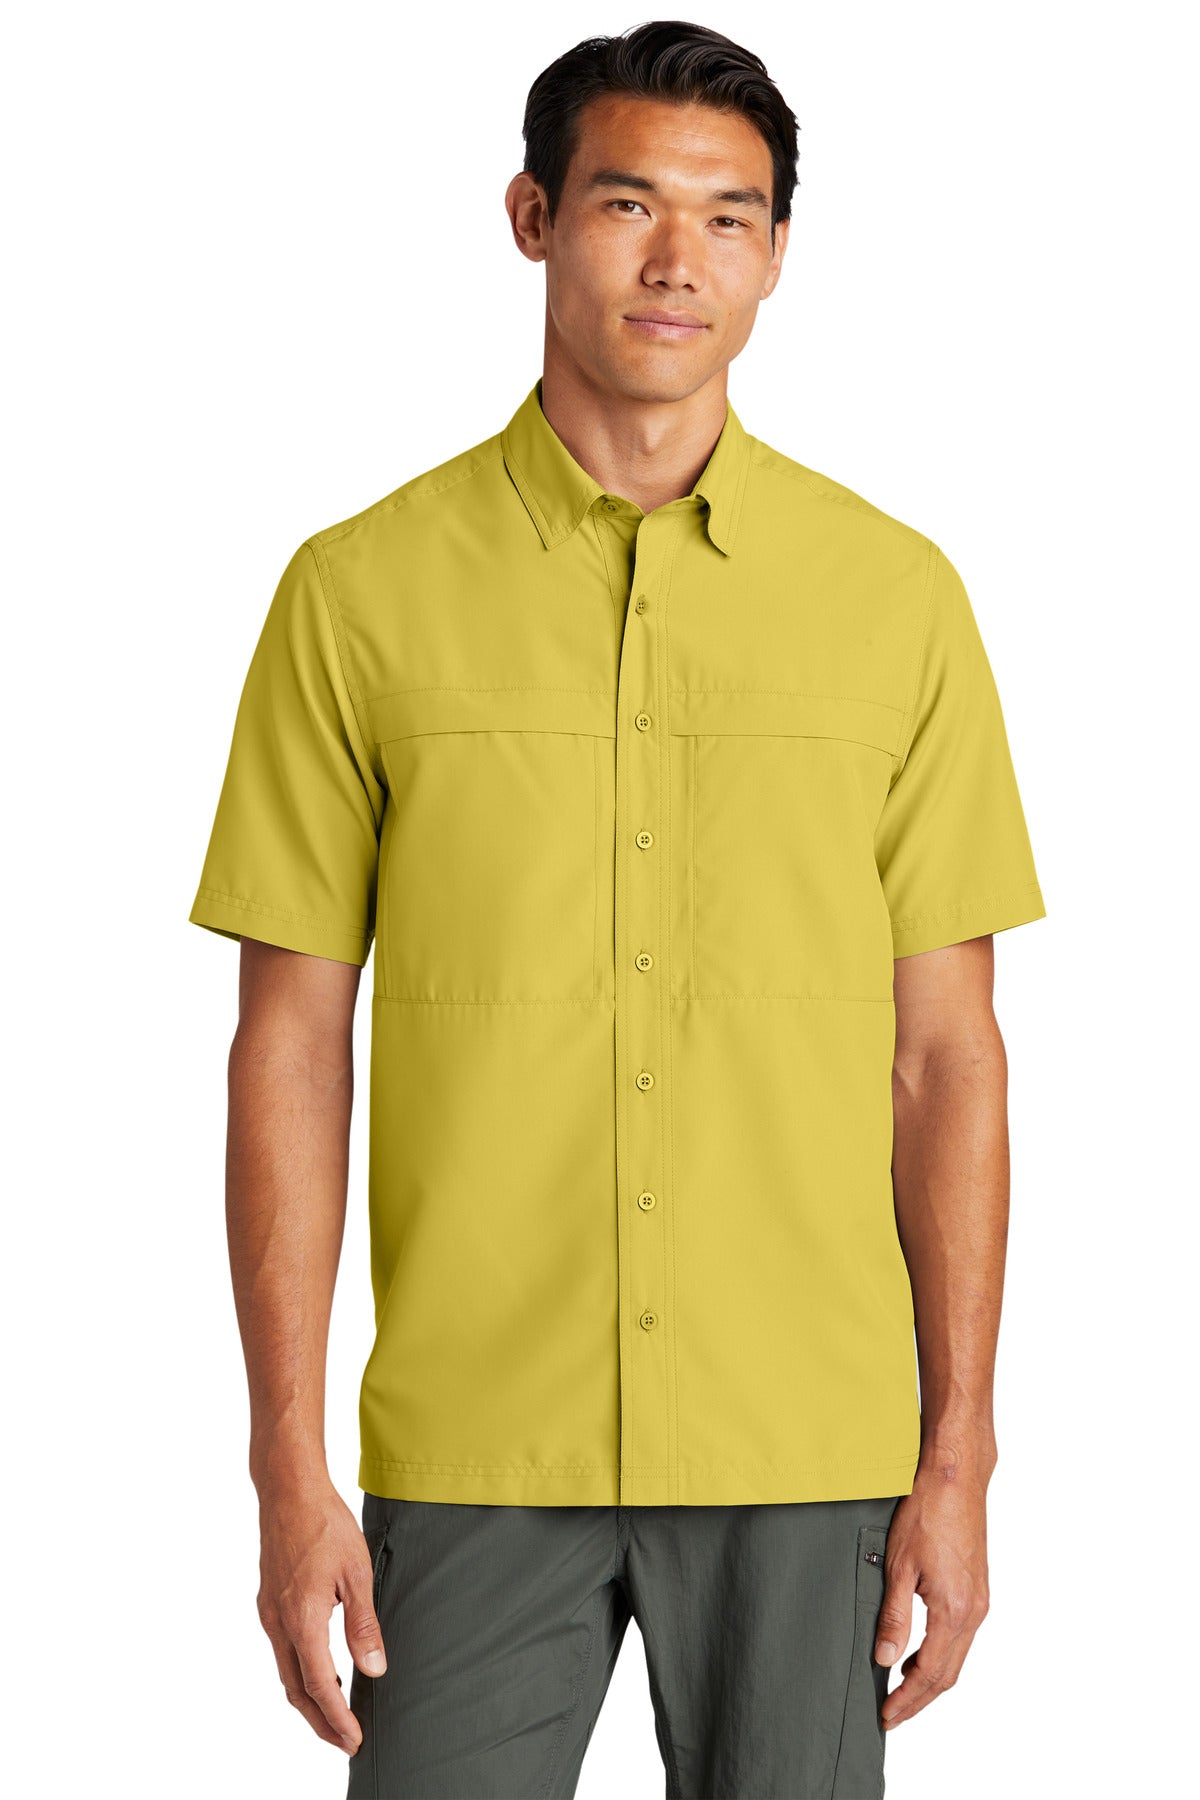 Woven Shirts Yellow Port Authority